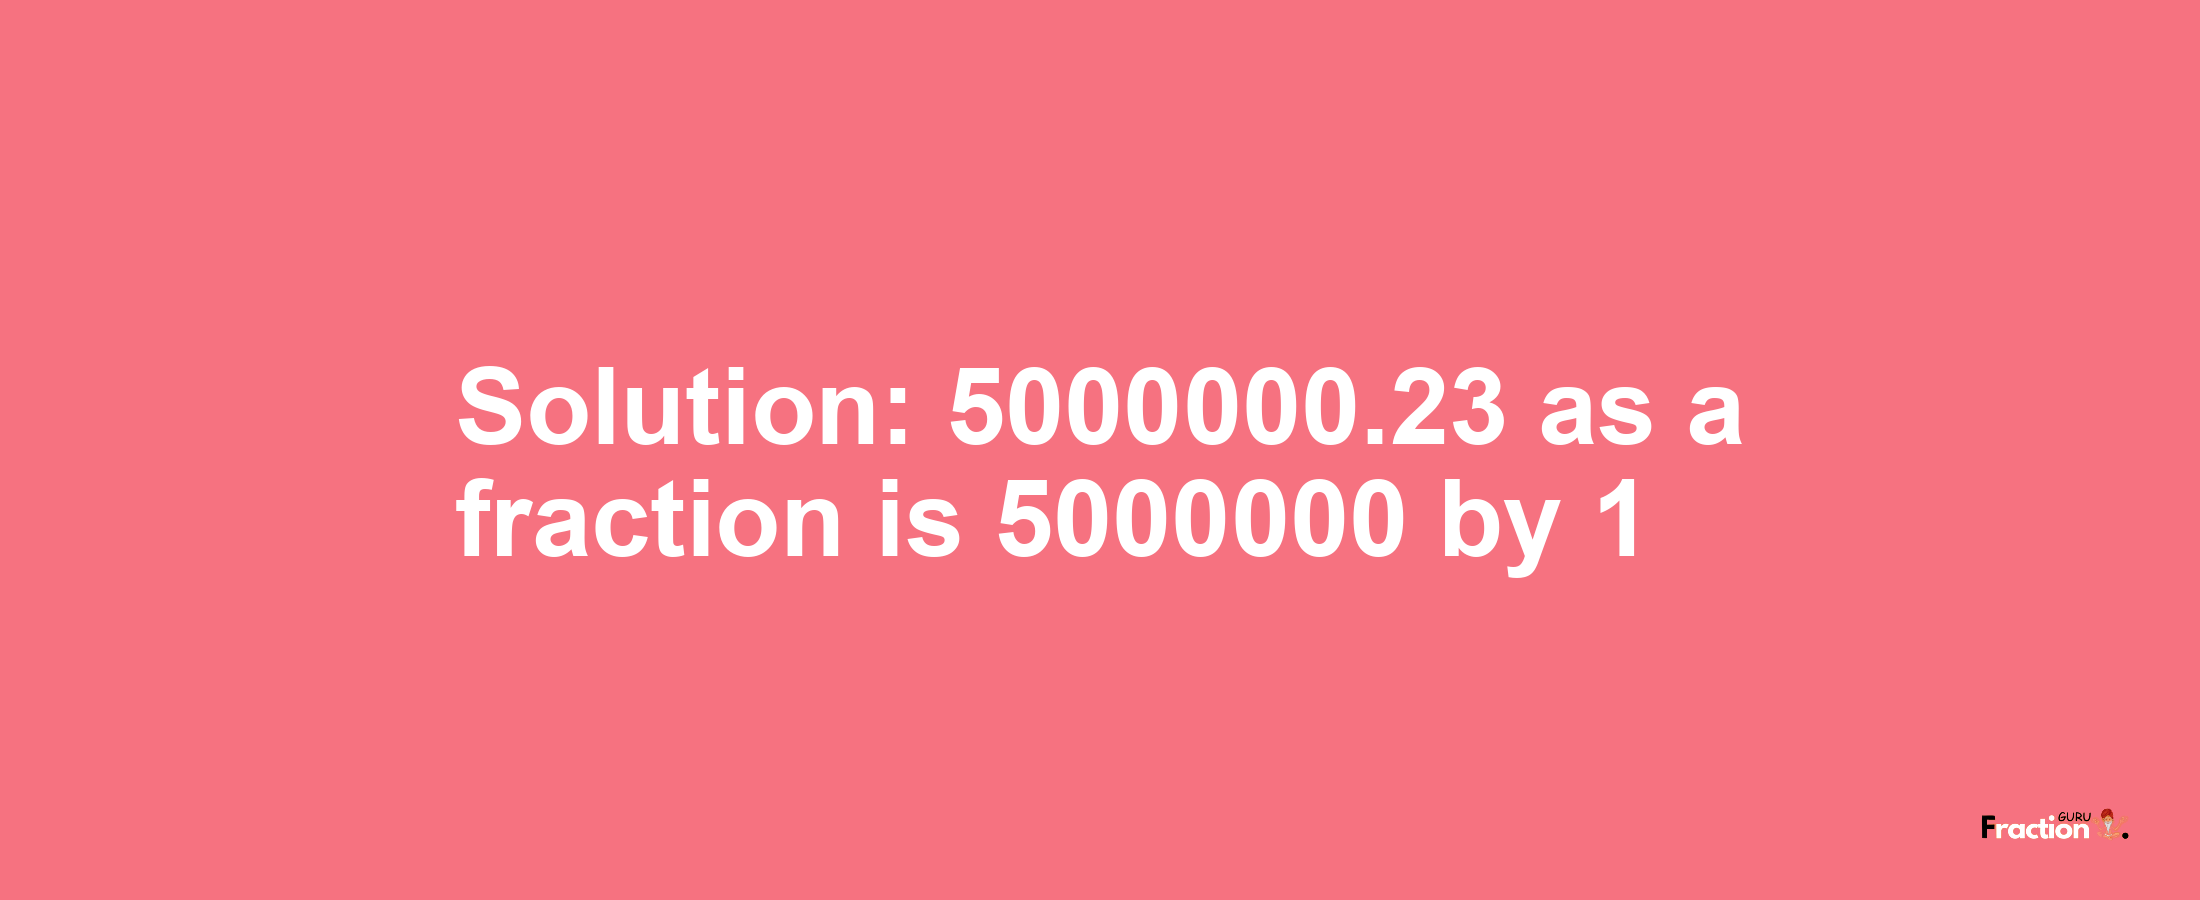 Solution:5000000.23 as a fraction is 5000000/1